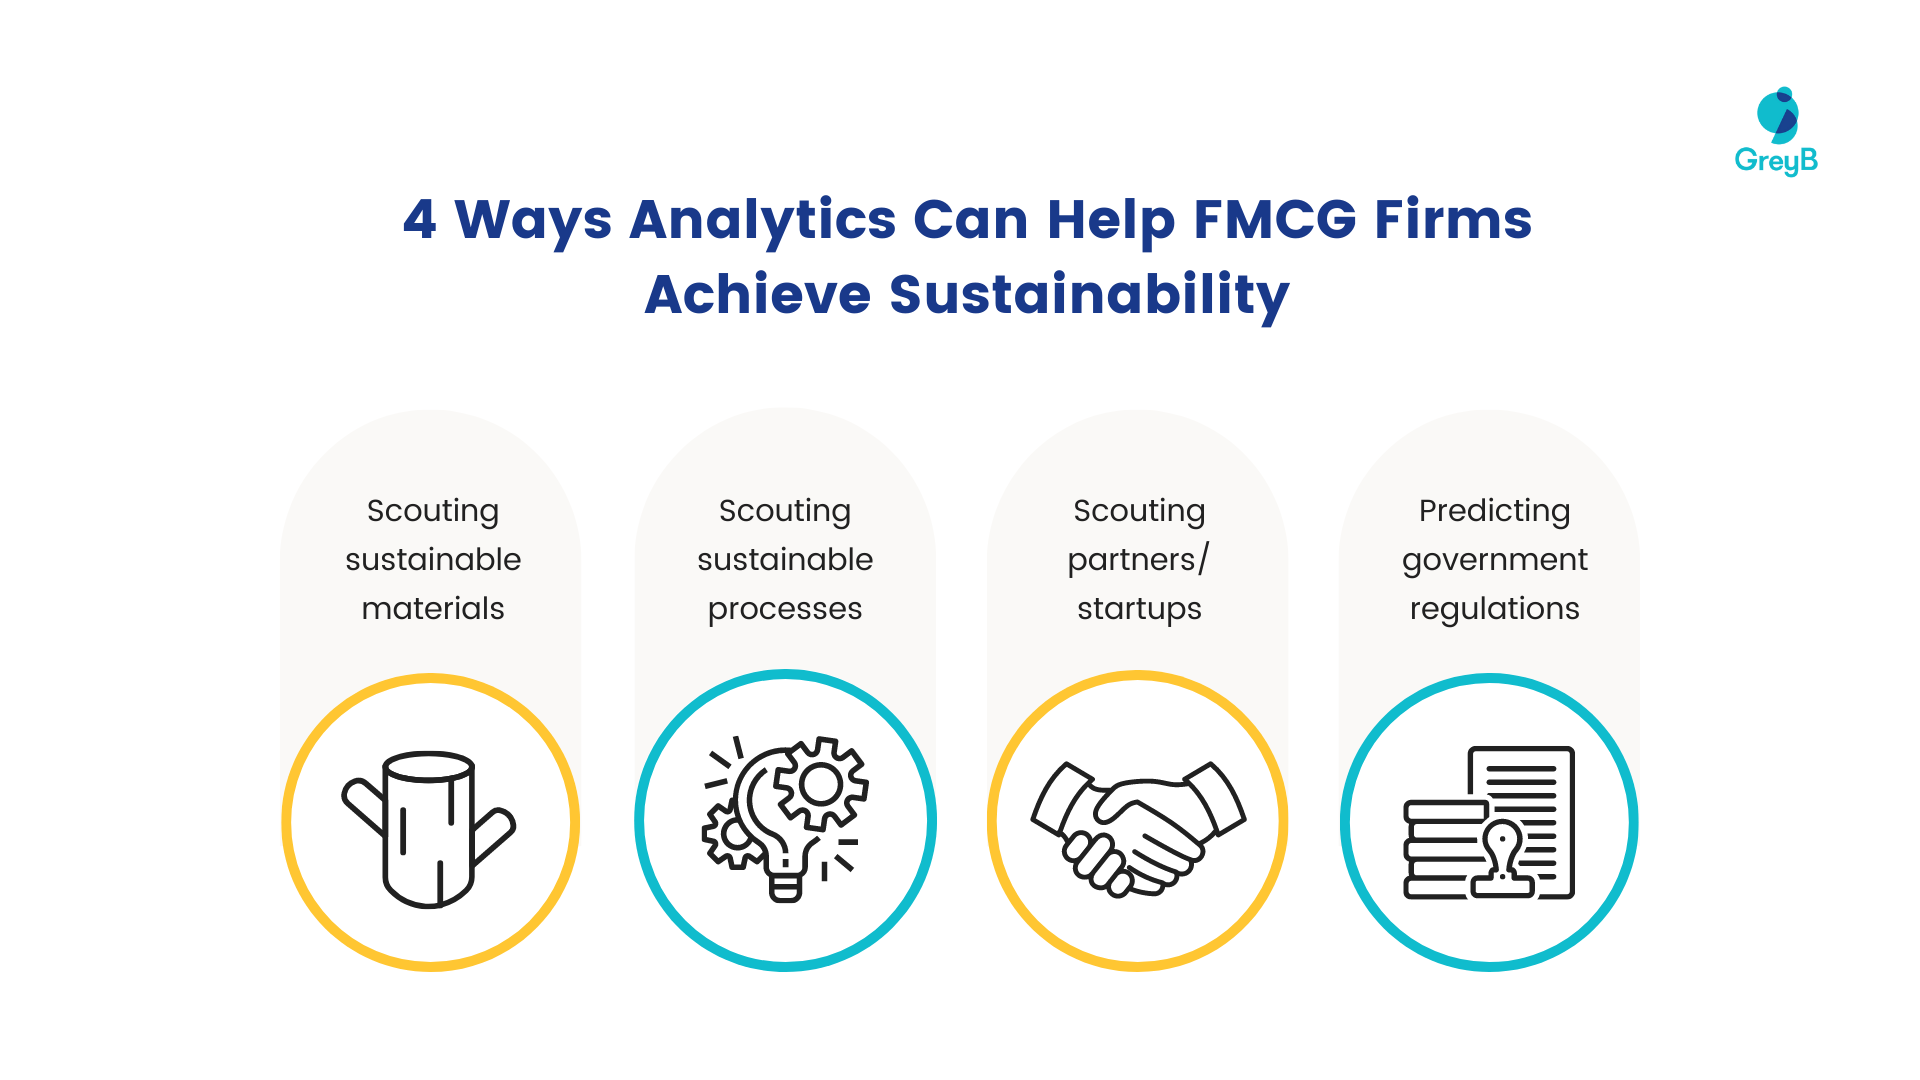 4 ways FMCG firms FMCG firms can use analytics to achieve sustainability